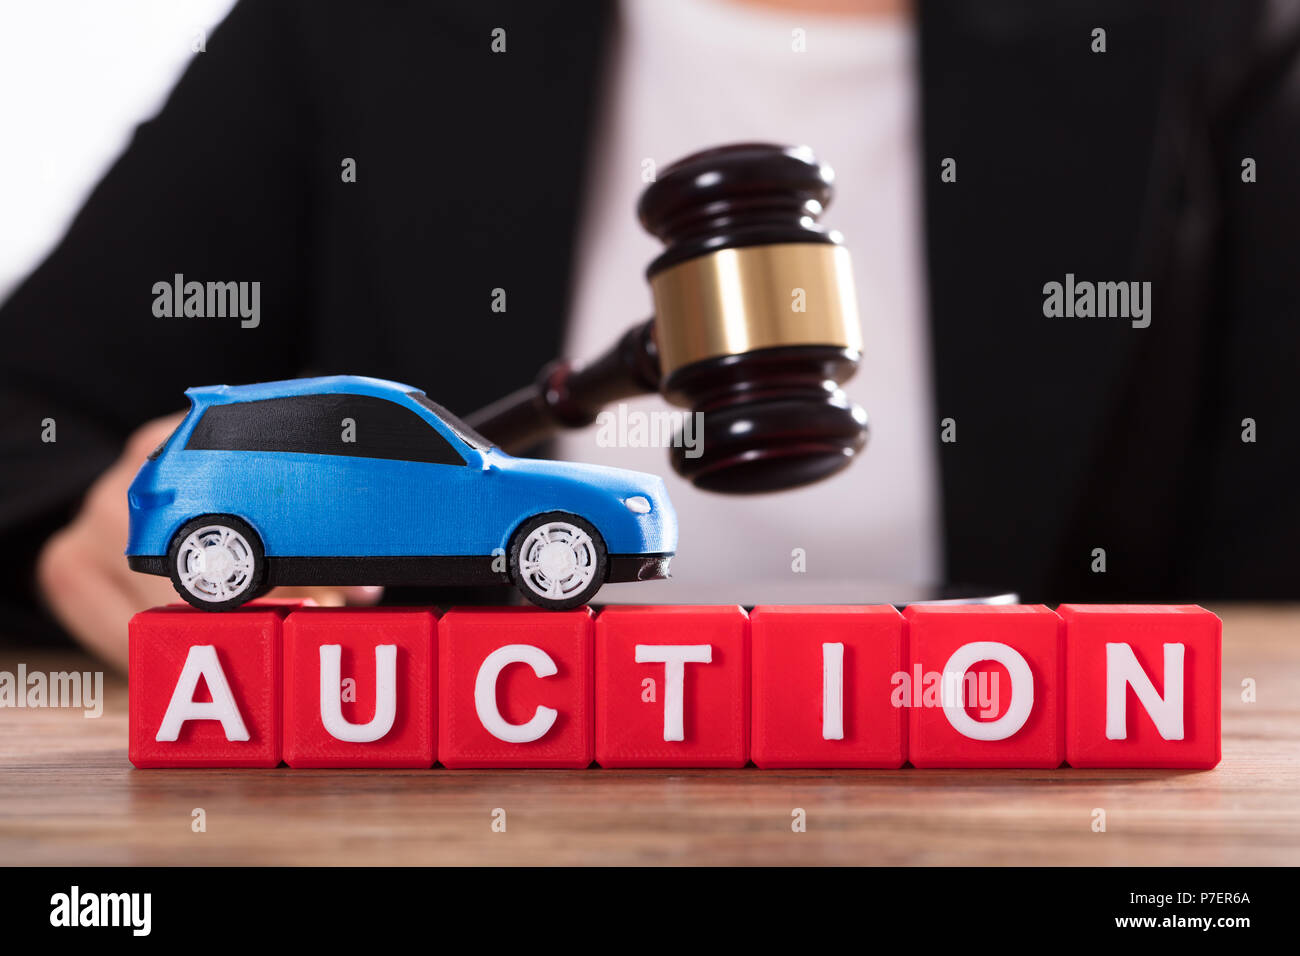 Small Blue Car Over Auction Cubic Blocks Stock Photo